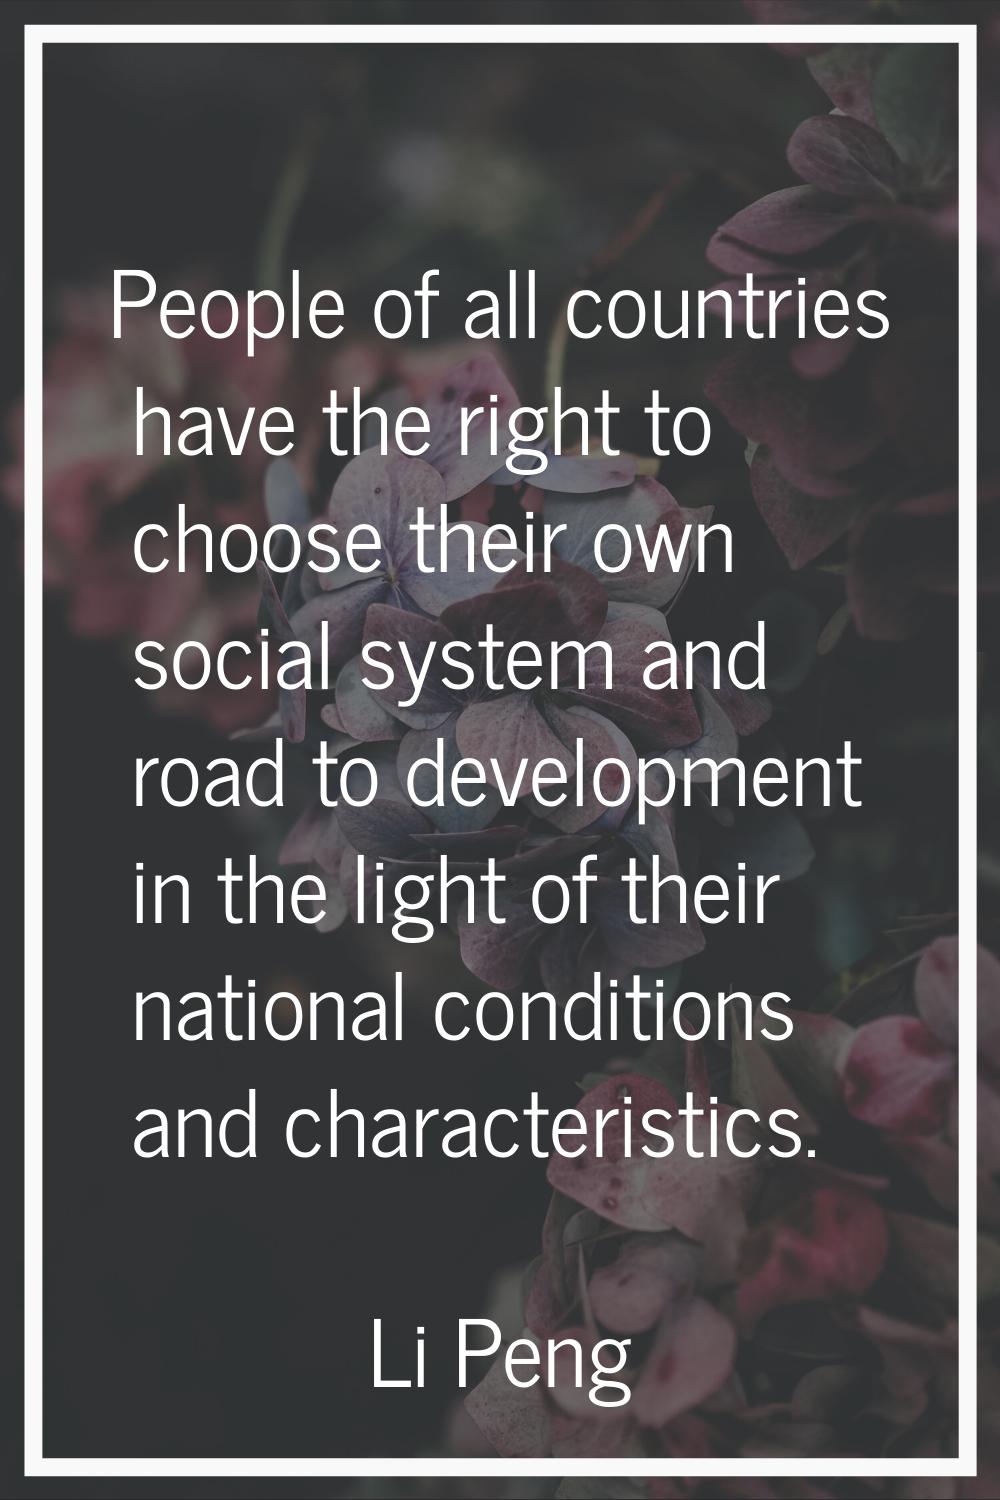 People of all countries have the right to choose their own social system and road to development in